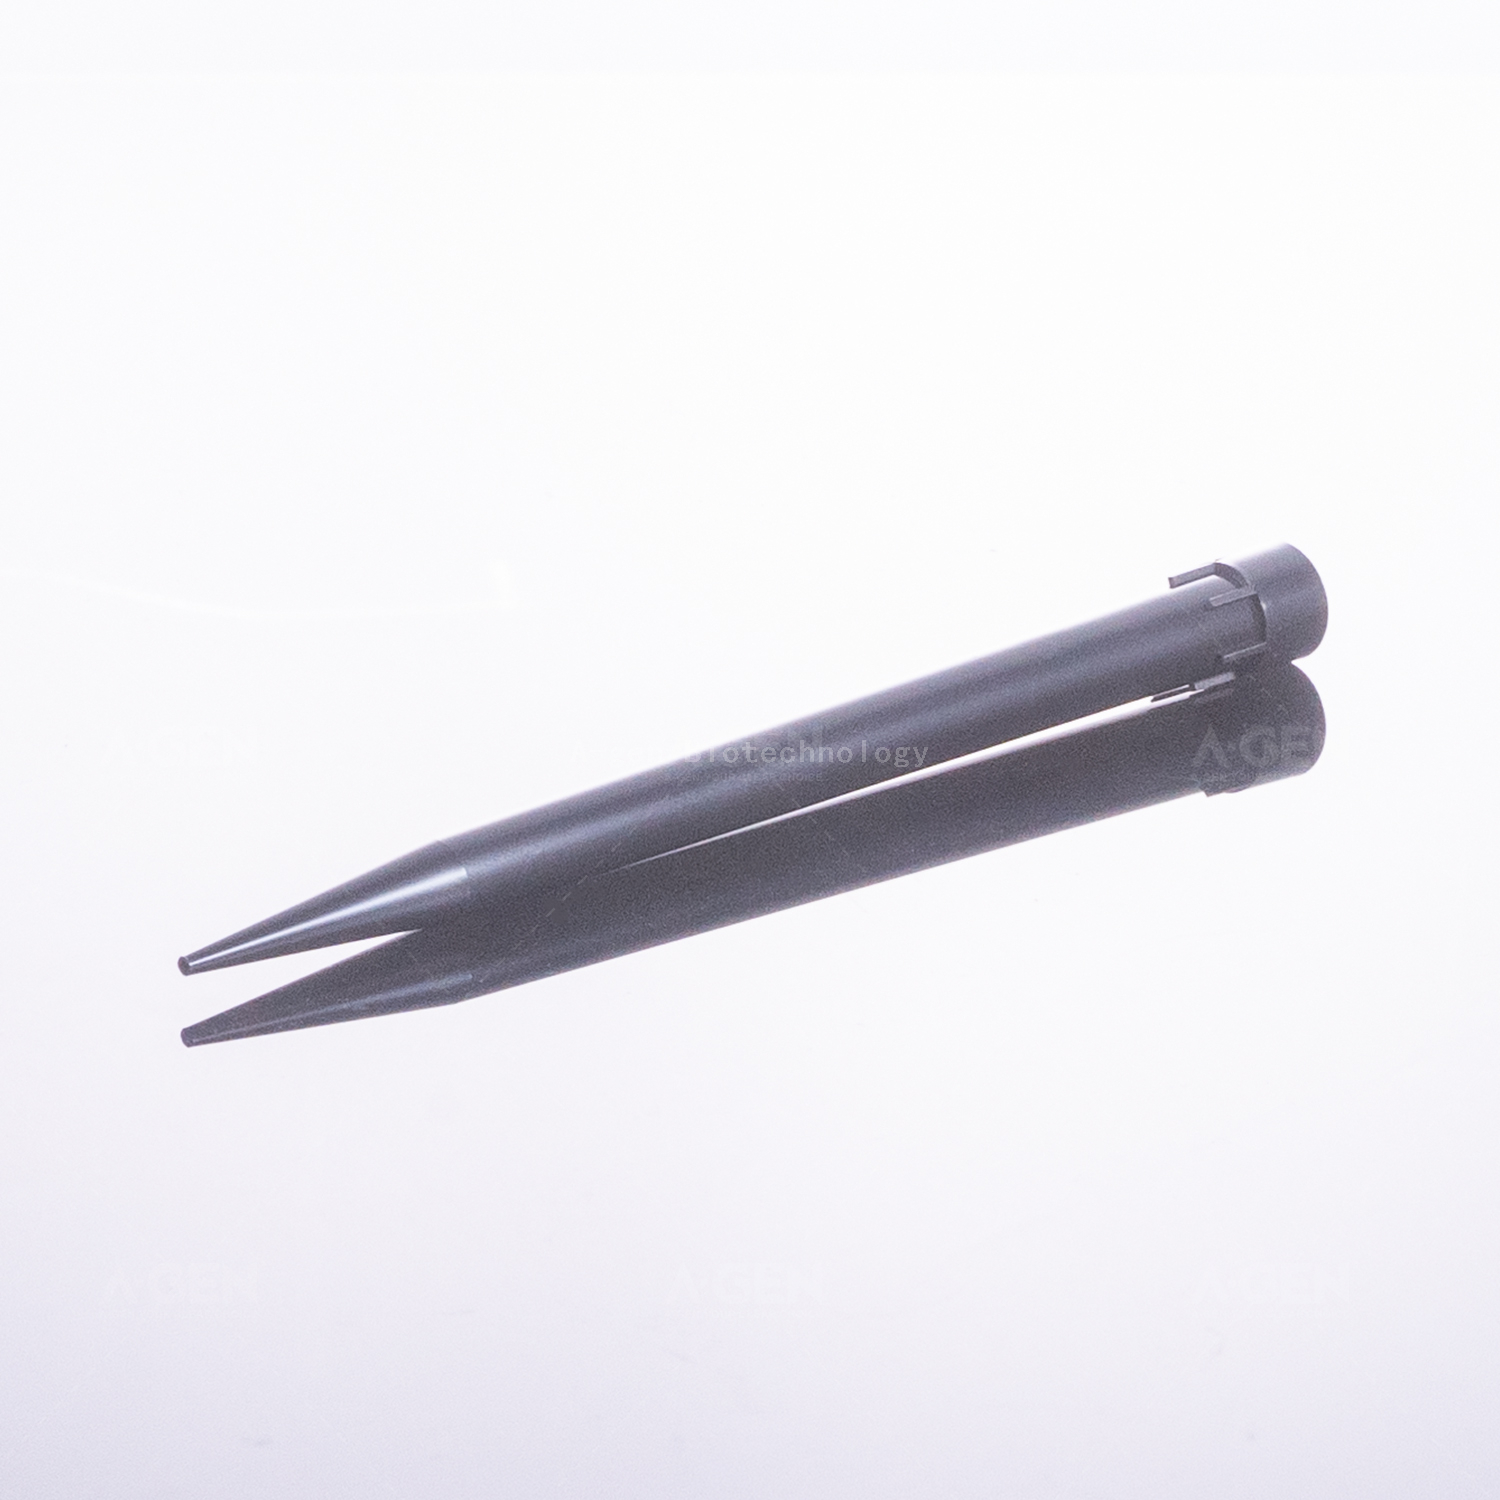 Hamilton Pipette Tip Conductive 1000μL Black PP Pipette Tip (Racked,sterile) for Lab Consumables Without Filter HT-1000C-RSL Low Retention Or Not